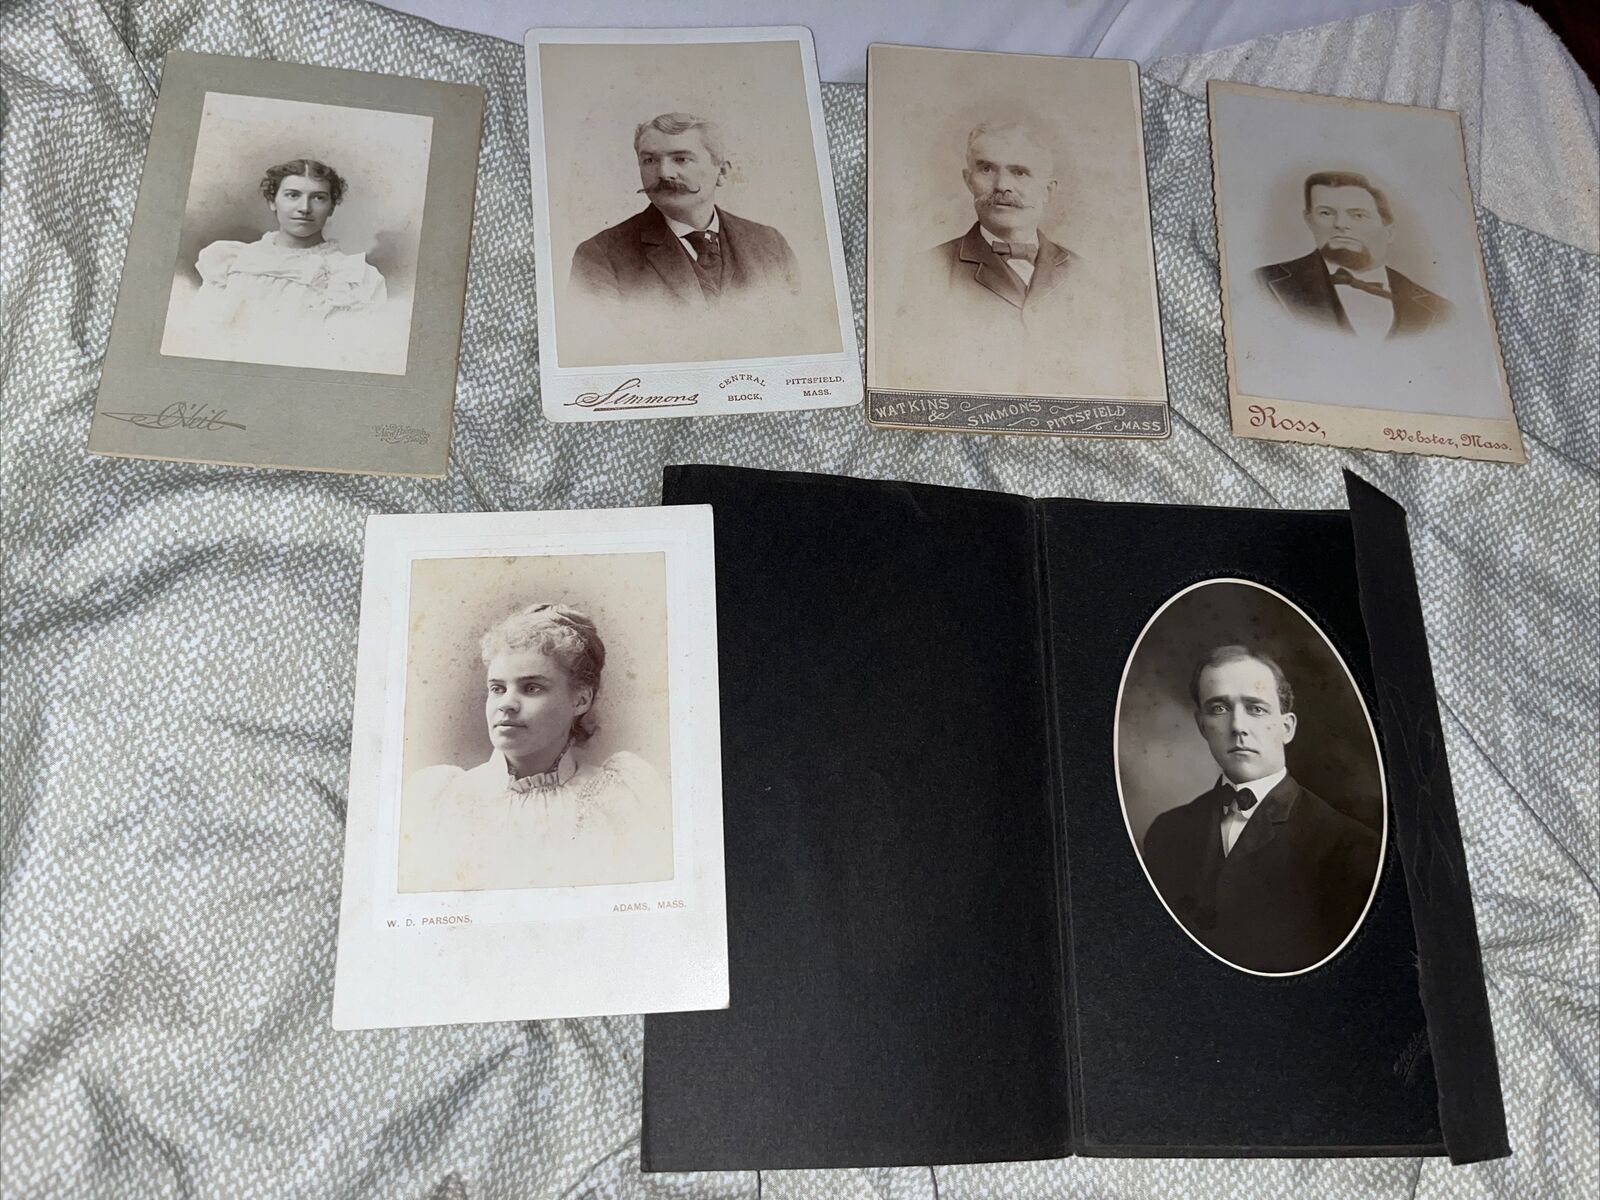 Lot 6 Antique Cabinet Card Portraits from Massachusetts Adams Pittsfield Webster